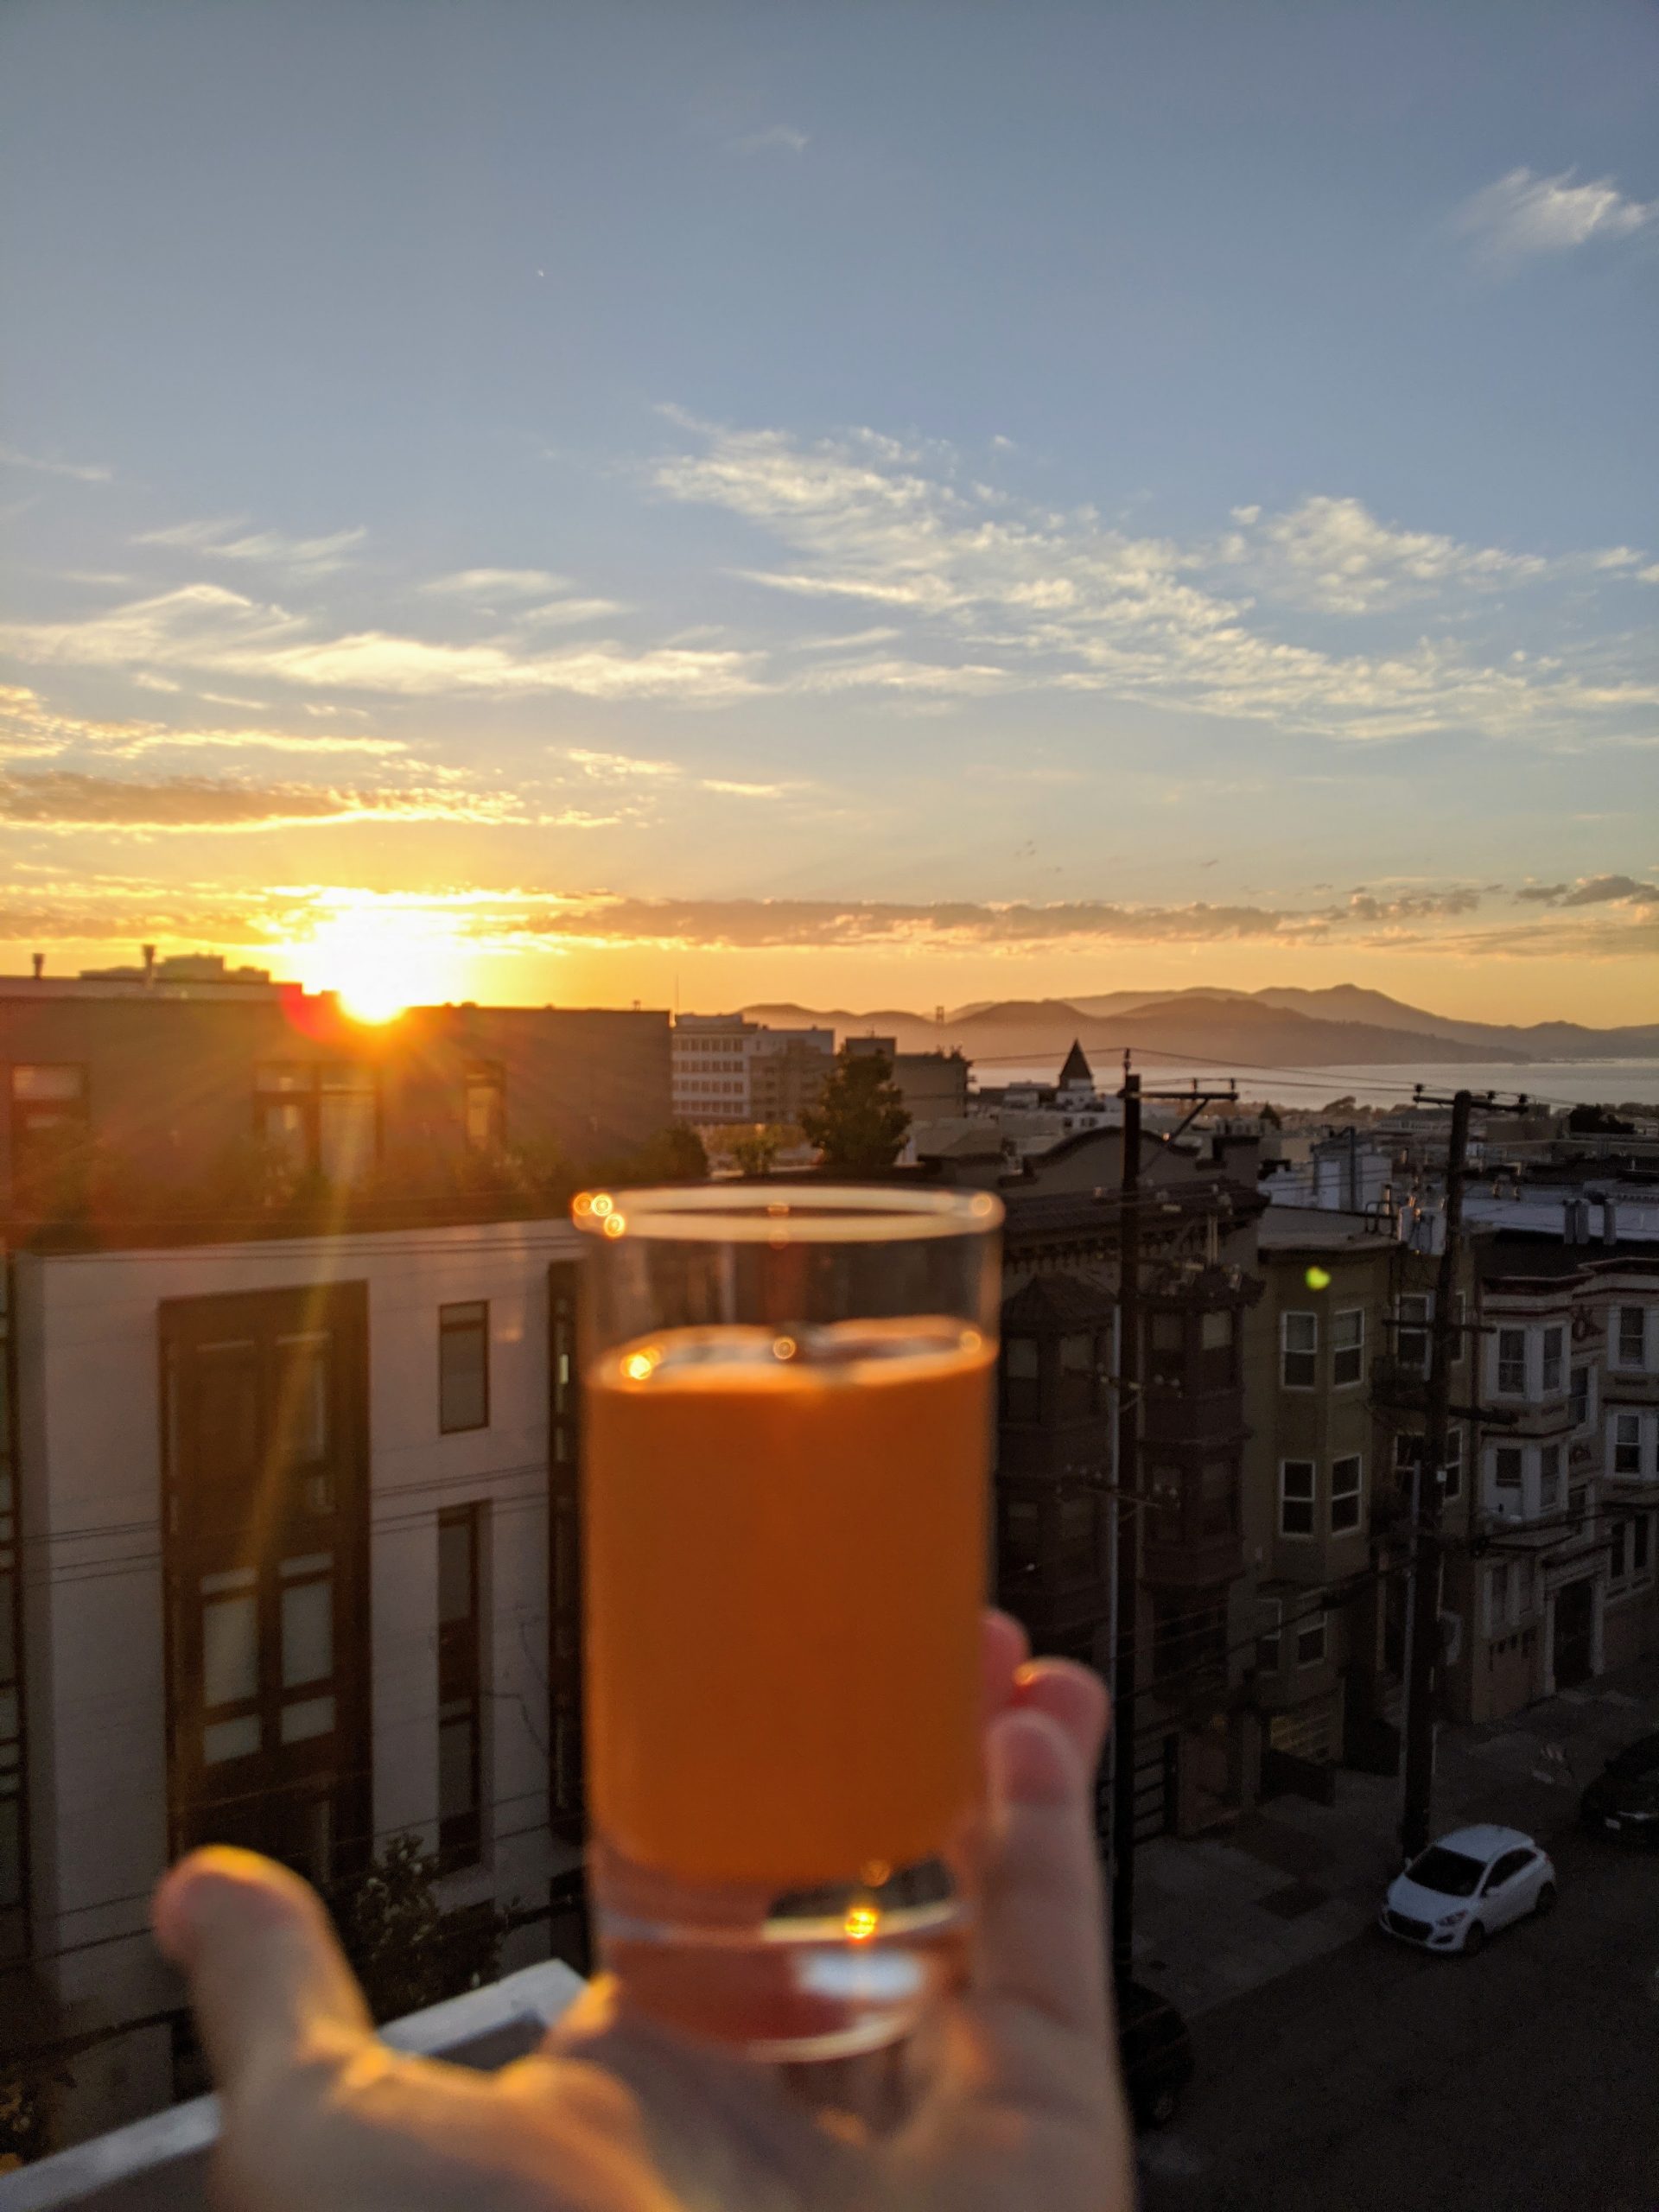 A shot glass of Andalusian Gazpacho with a backdrop of the Golden Gate Bridge.